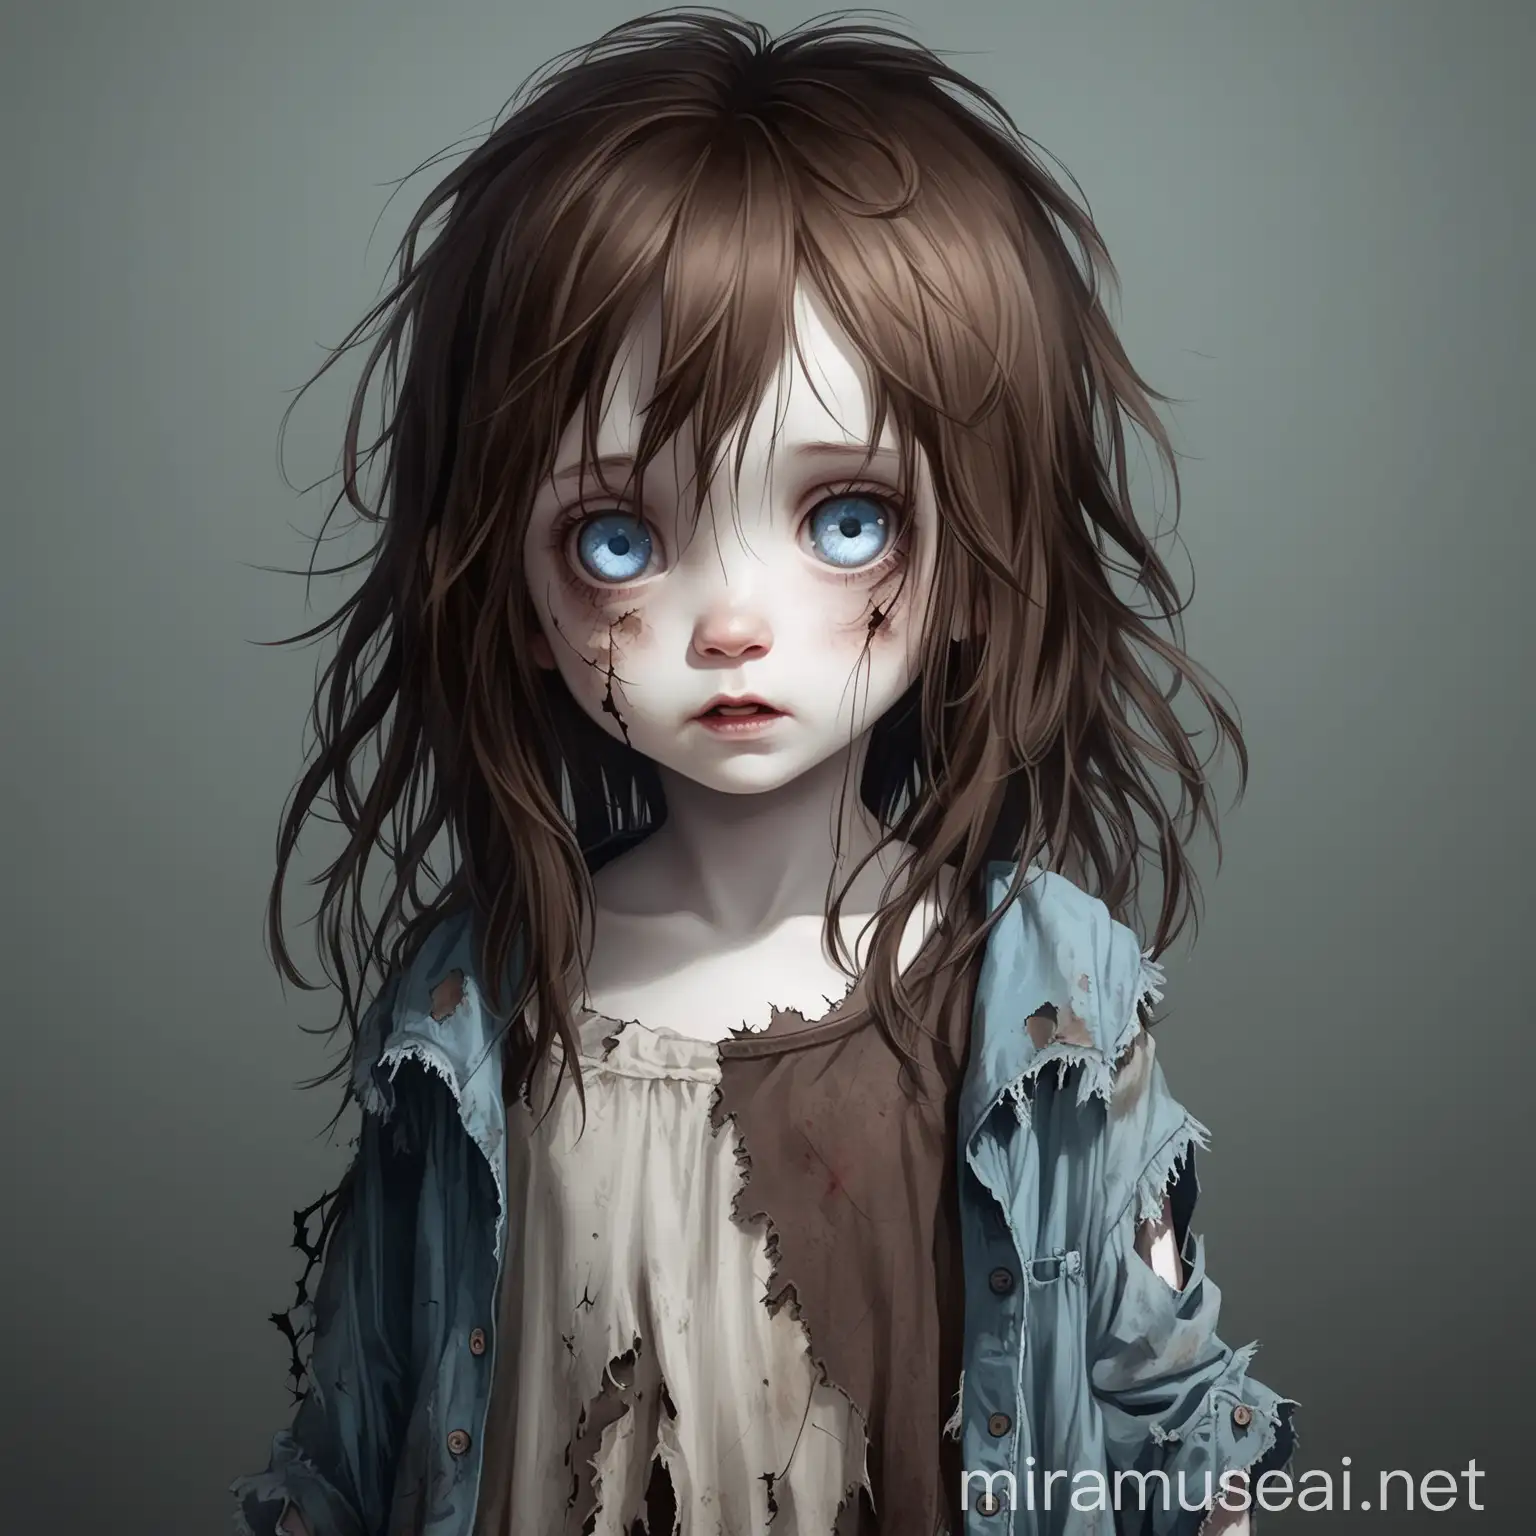 Adorable Little Girl in Tattered Clothes with Messy Brown Hair and Blue Eyes